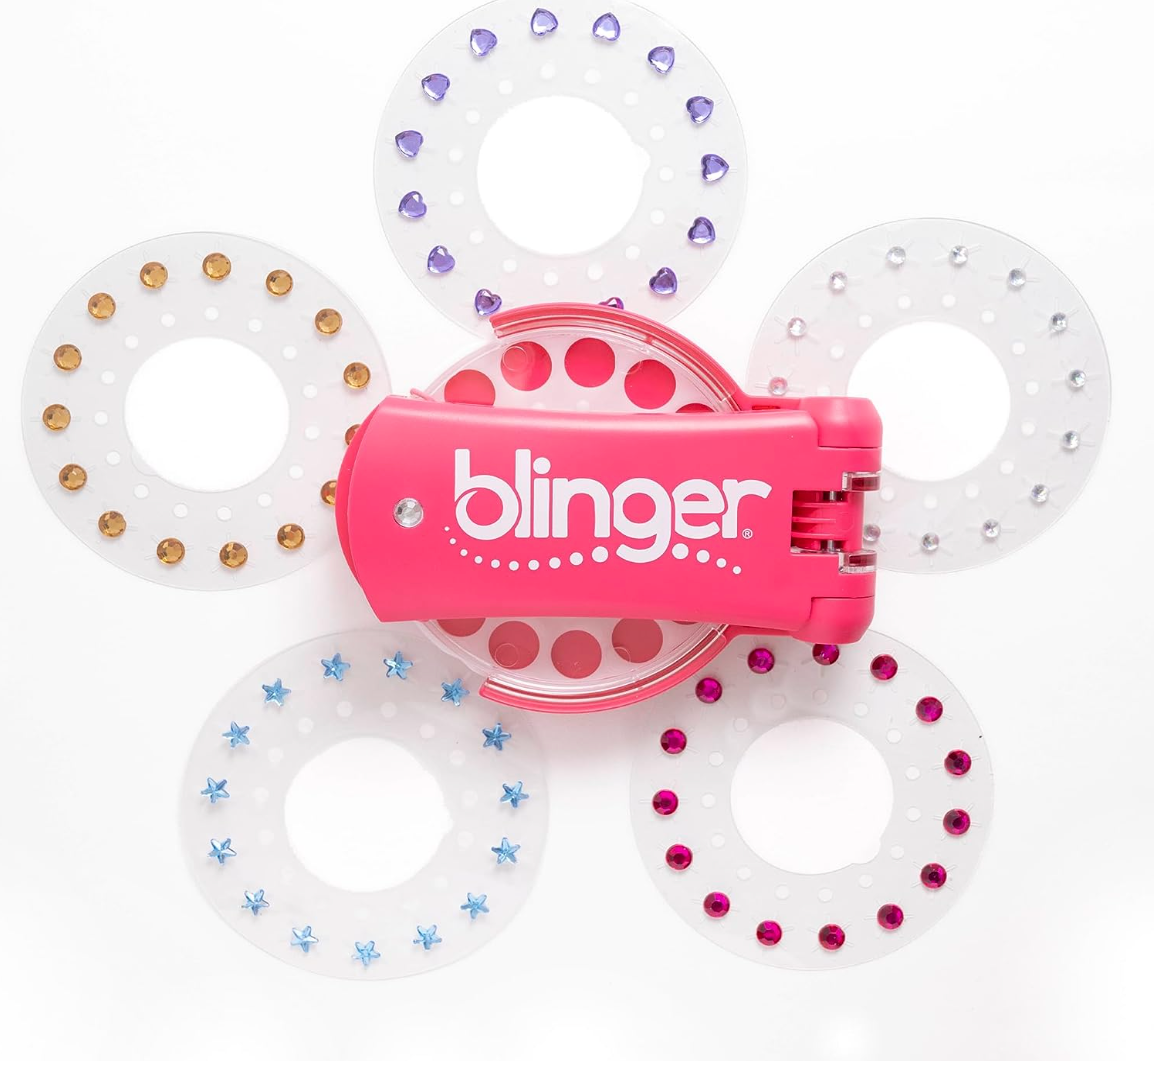 blinger Glimmer Refill Pack | 5 Discs - 75 Precision-Cut Crystals |  Bedazzling Hair Gems | Hair-Safe Adhesive – Bling In Brush Out | Works with